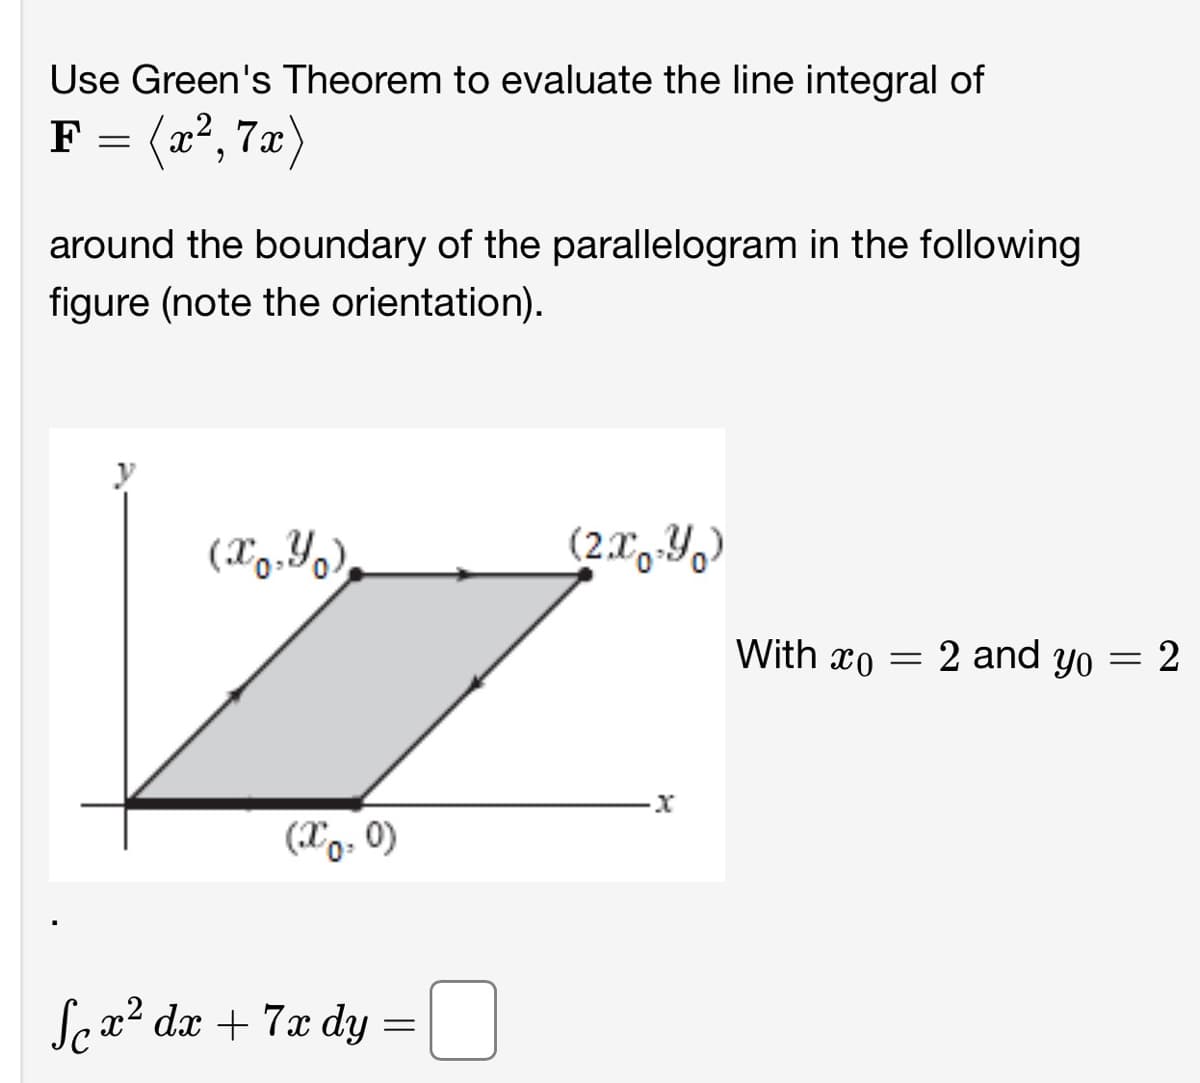 Use Green's Theorem to evaluate the line integral of
F = = (x², 7x)
around the boundary of the parallelogram in the following
figure (note the orientation).
(x,y),
(x0, 0)
Se x² dx + 7x dy = □
(2x-Y)
·x
With co
=
2 and yo
=
2